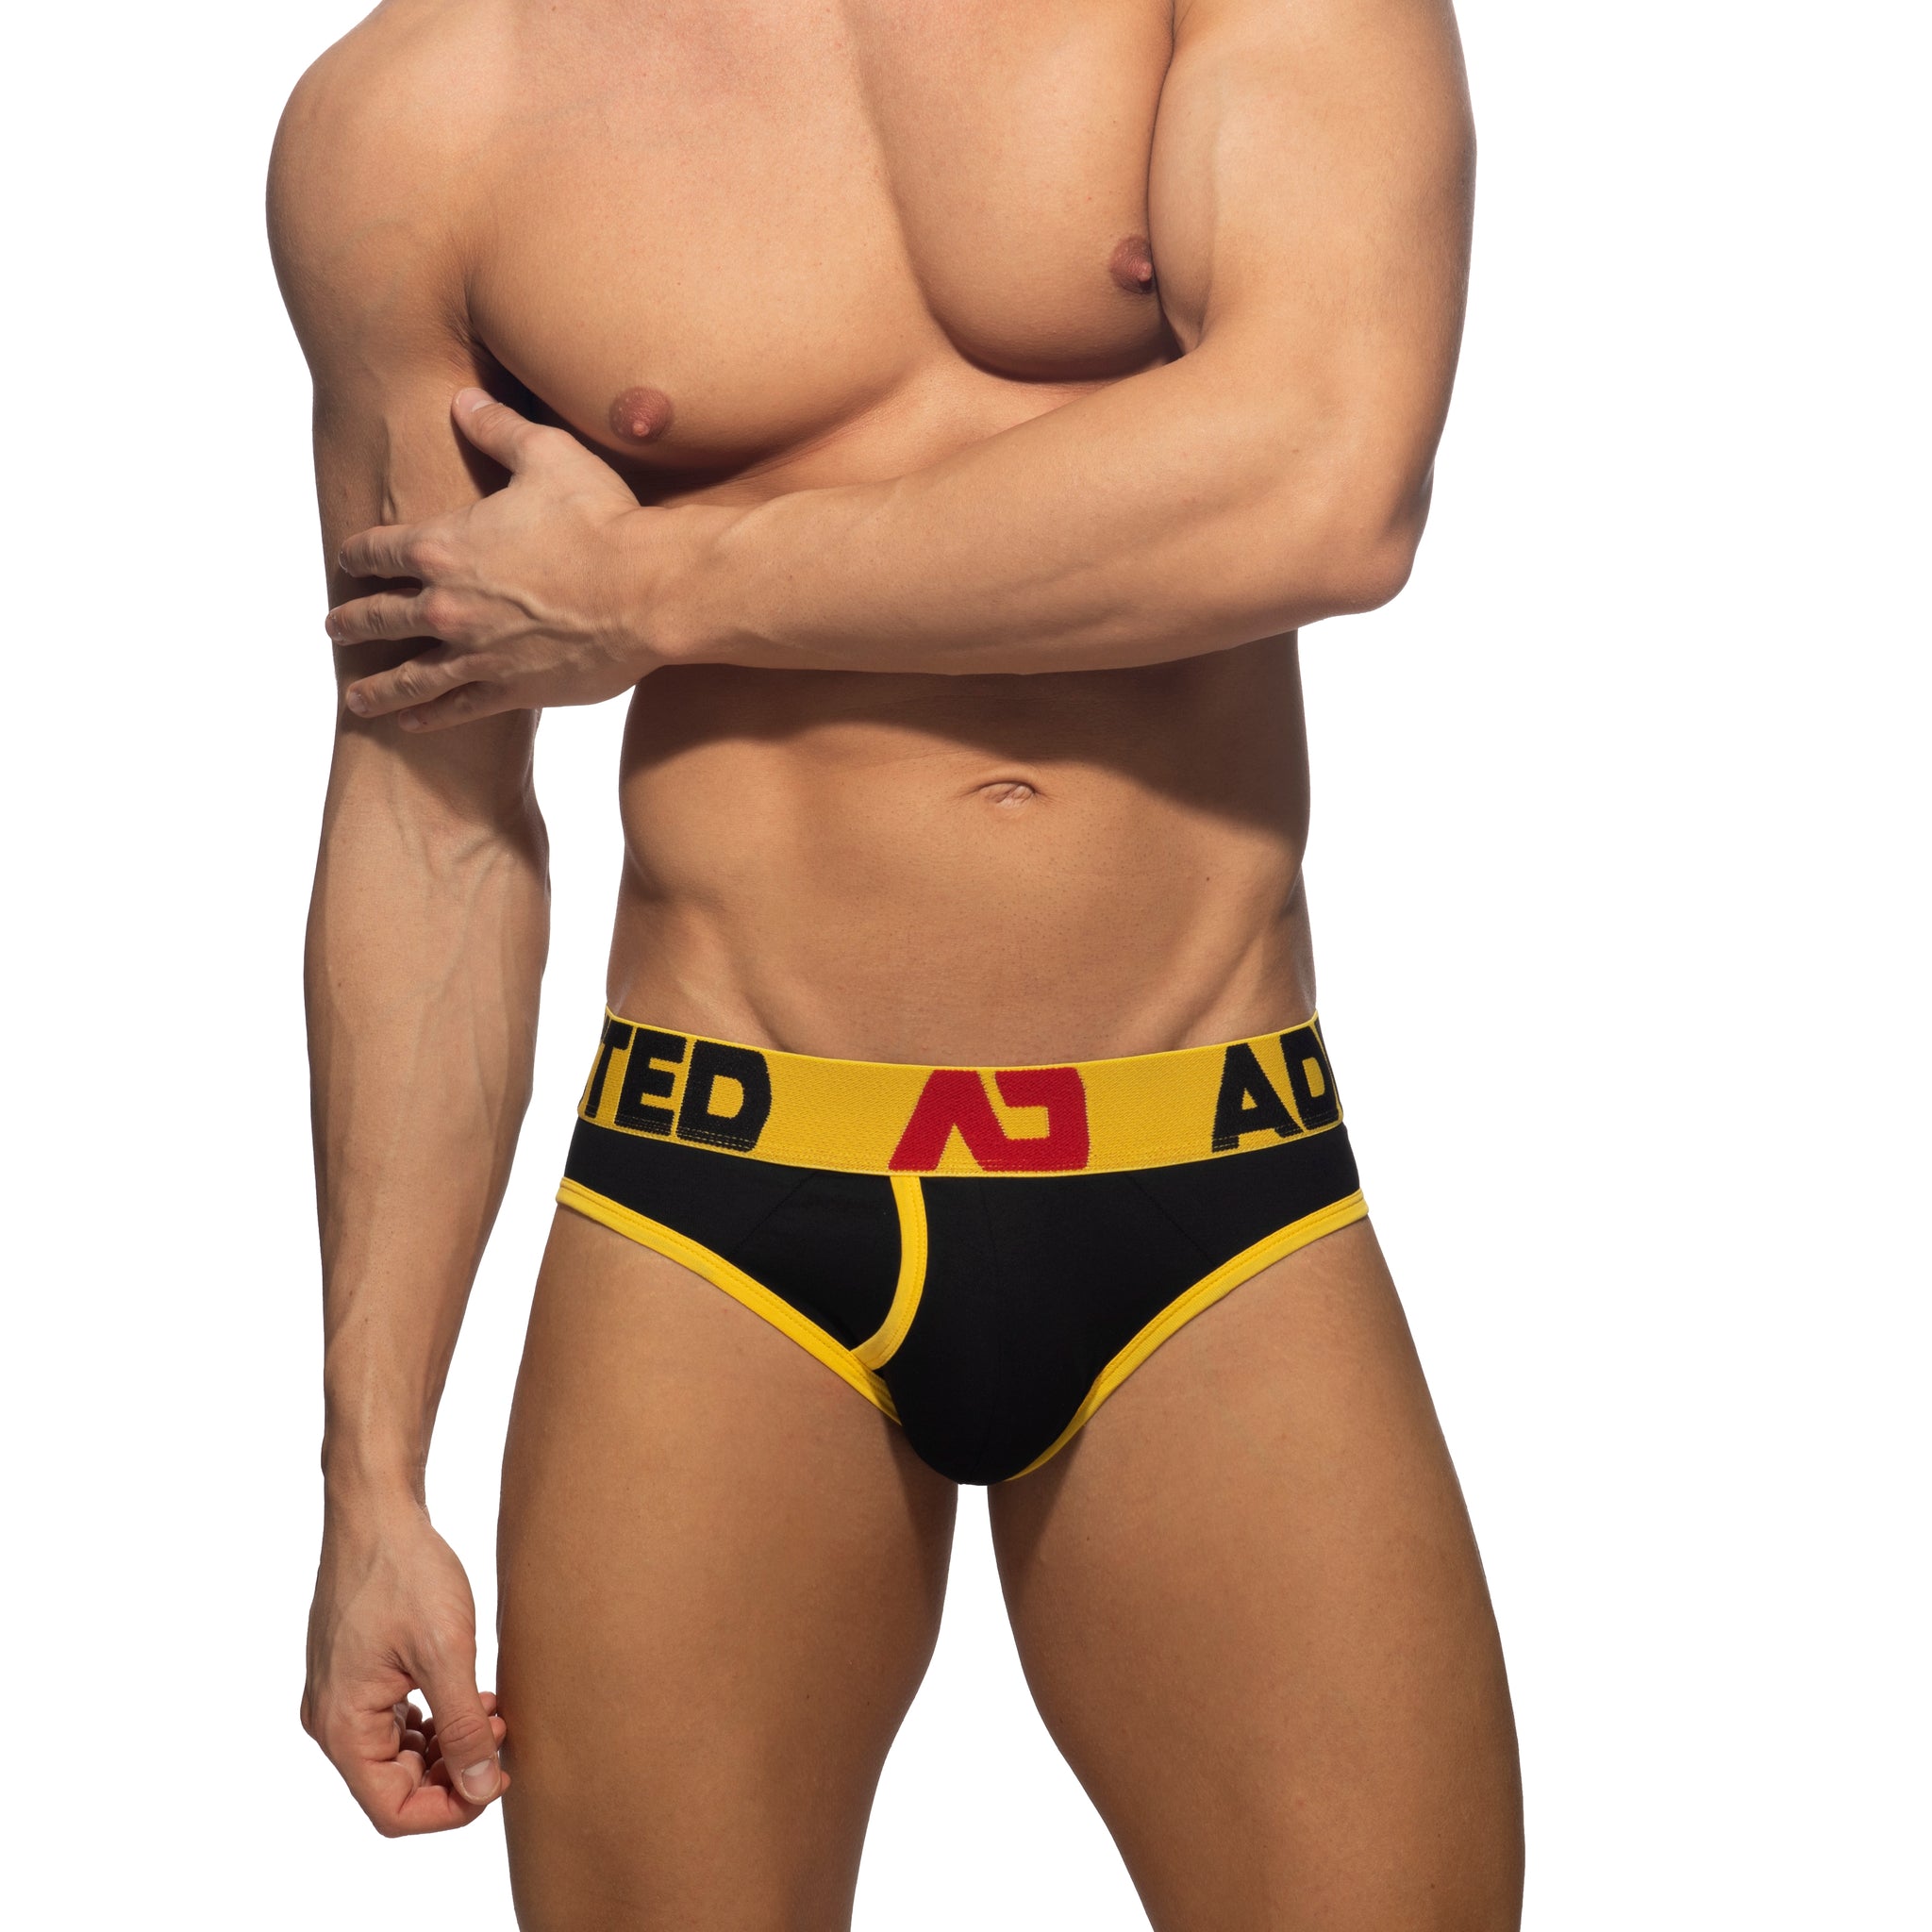 Addicted Open Fly Cotton Brief Yellow AD1202